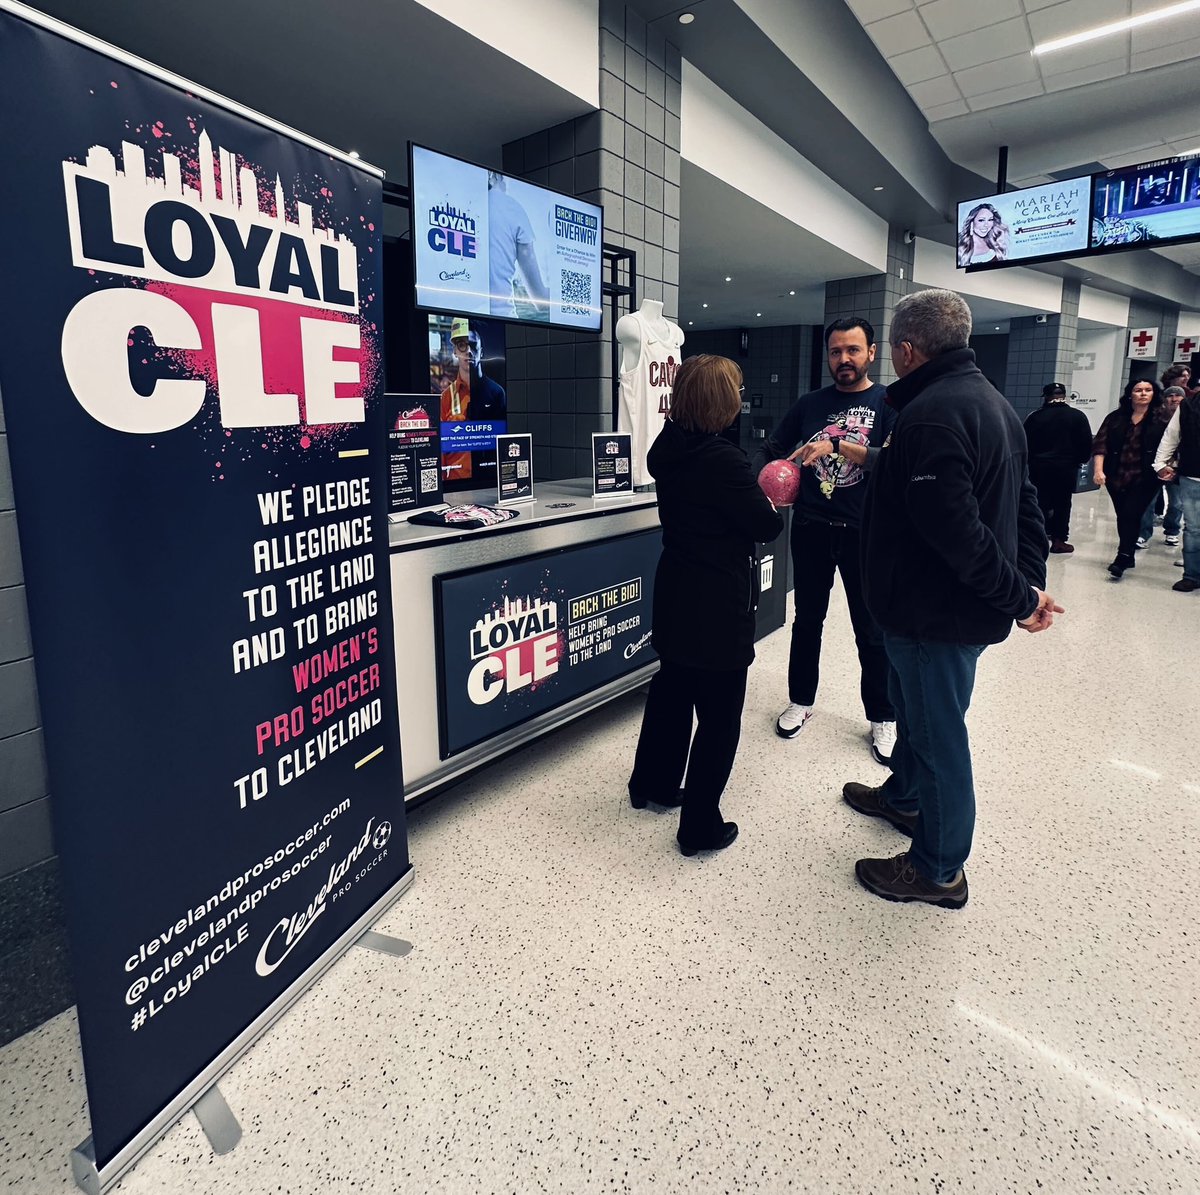 We’re always happy to talk #NWSL and @cleprosoccer in the community. Help us #BackTheBid and bring women’s pro soccer to our great city. #LoyalCLE